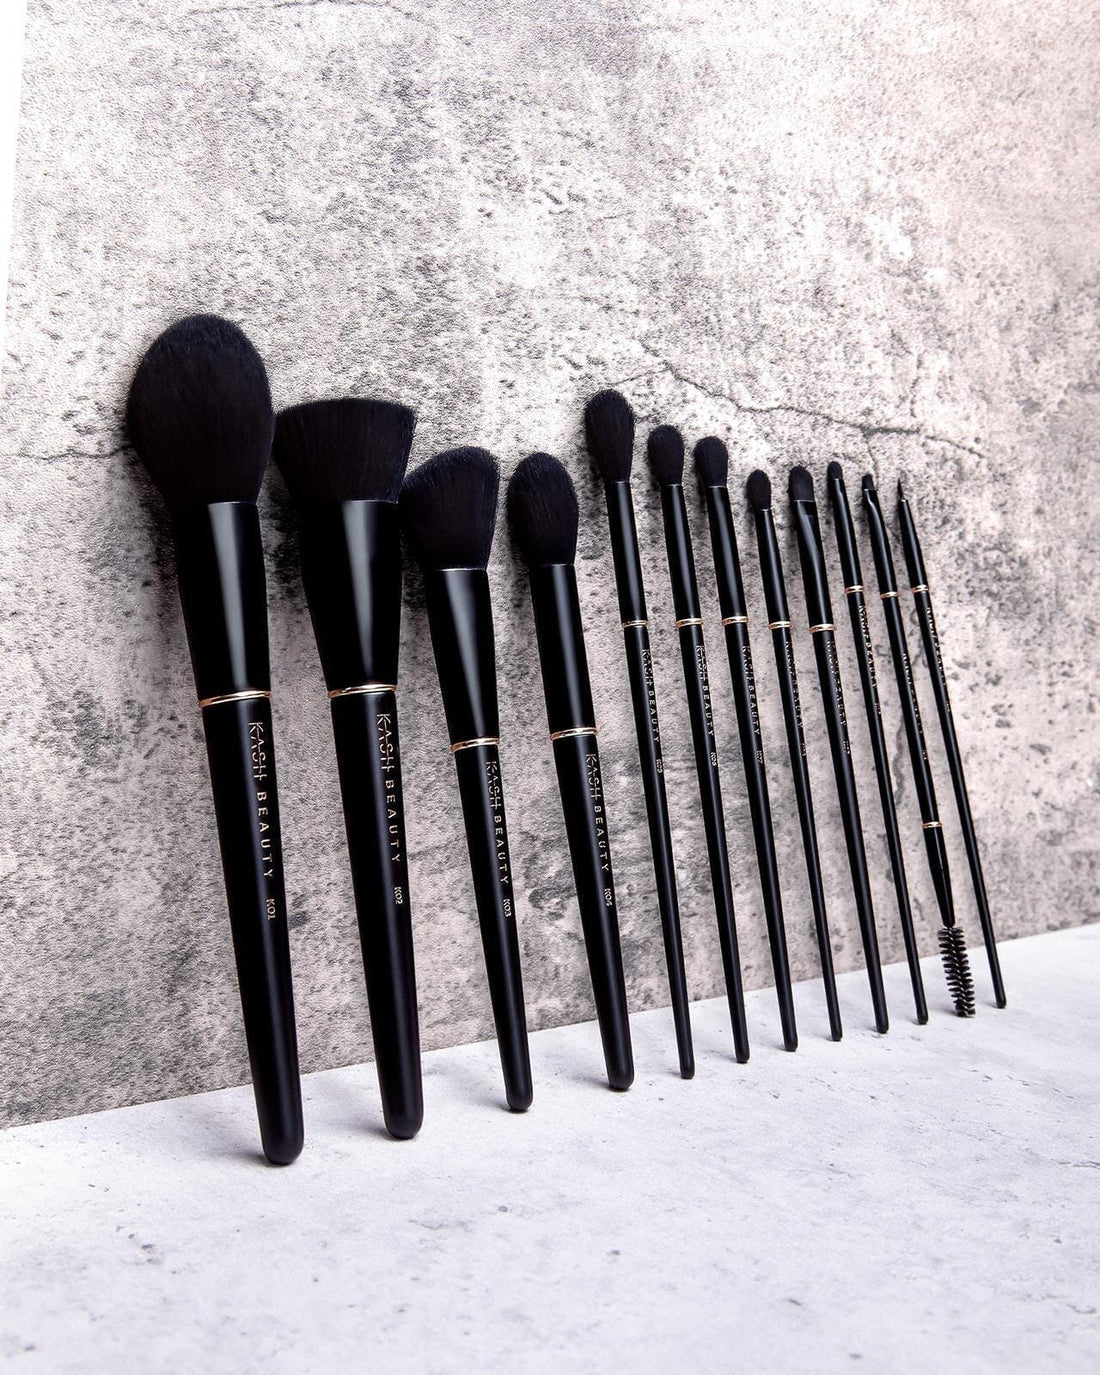 Kash Beauty Brush Set in top 5 brush sets right now!  - KASH Beauty